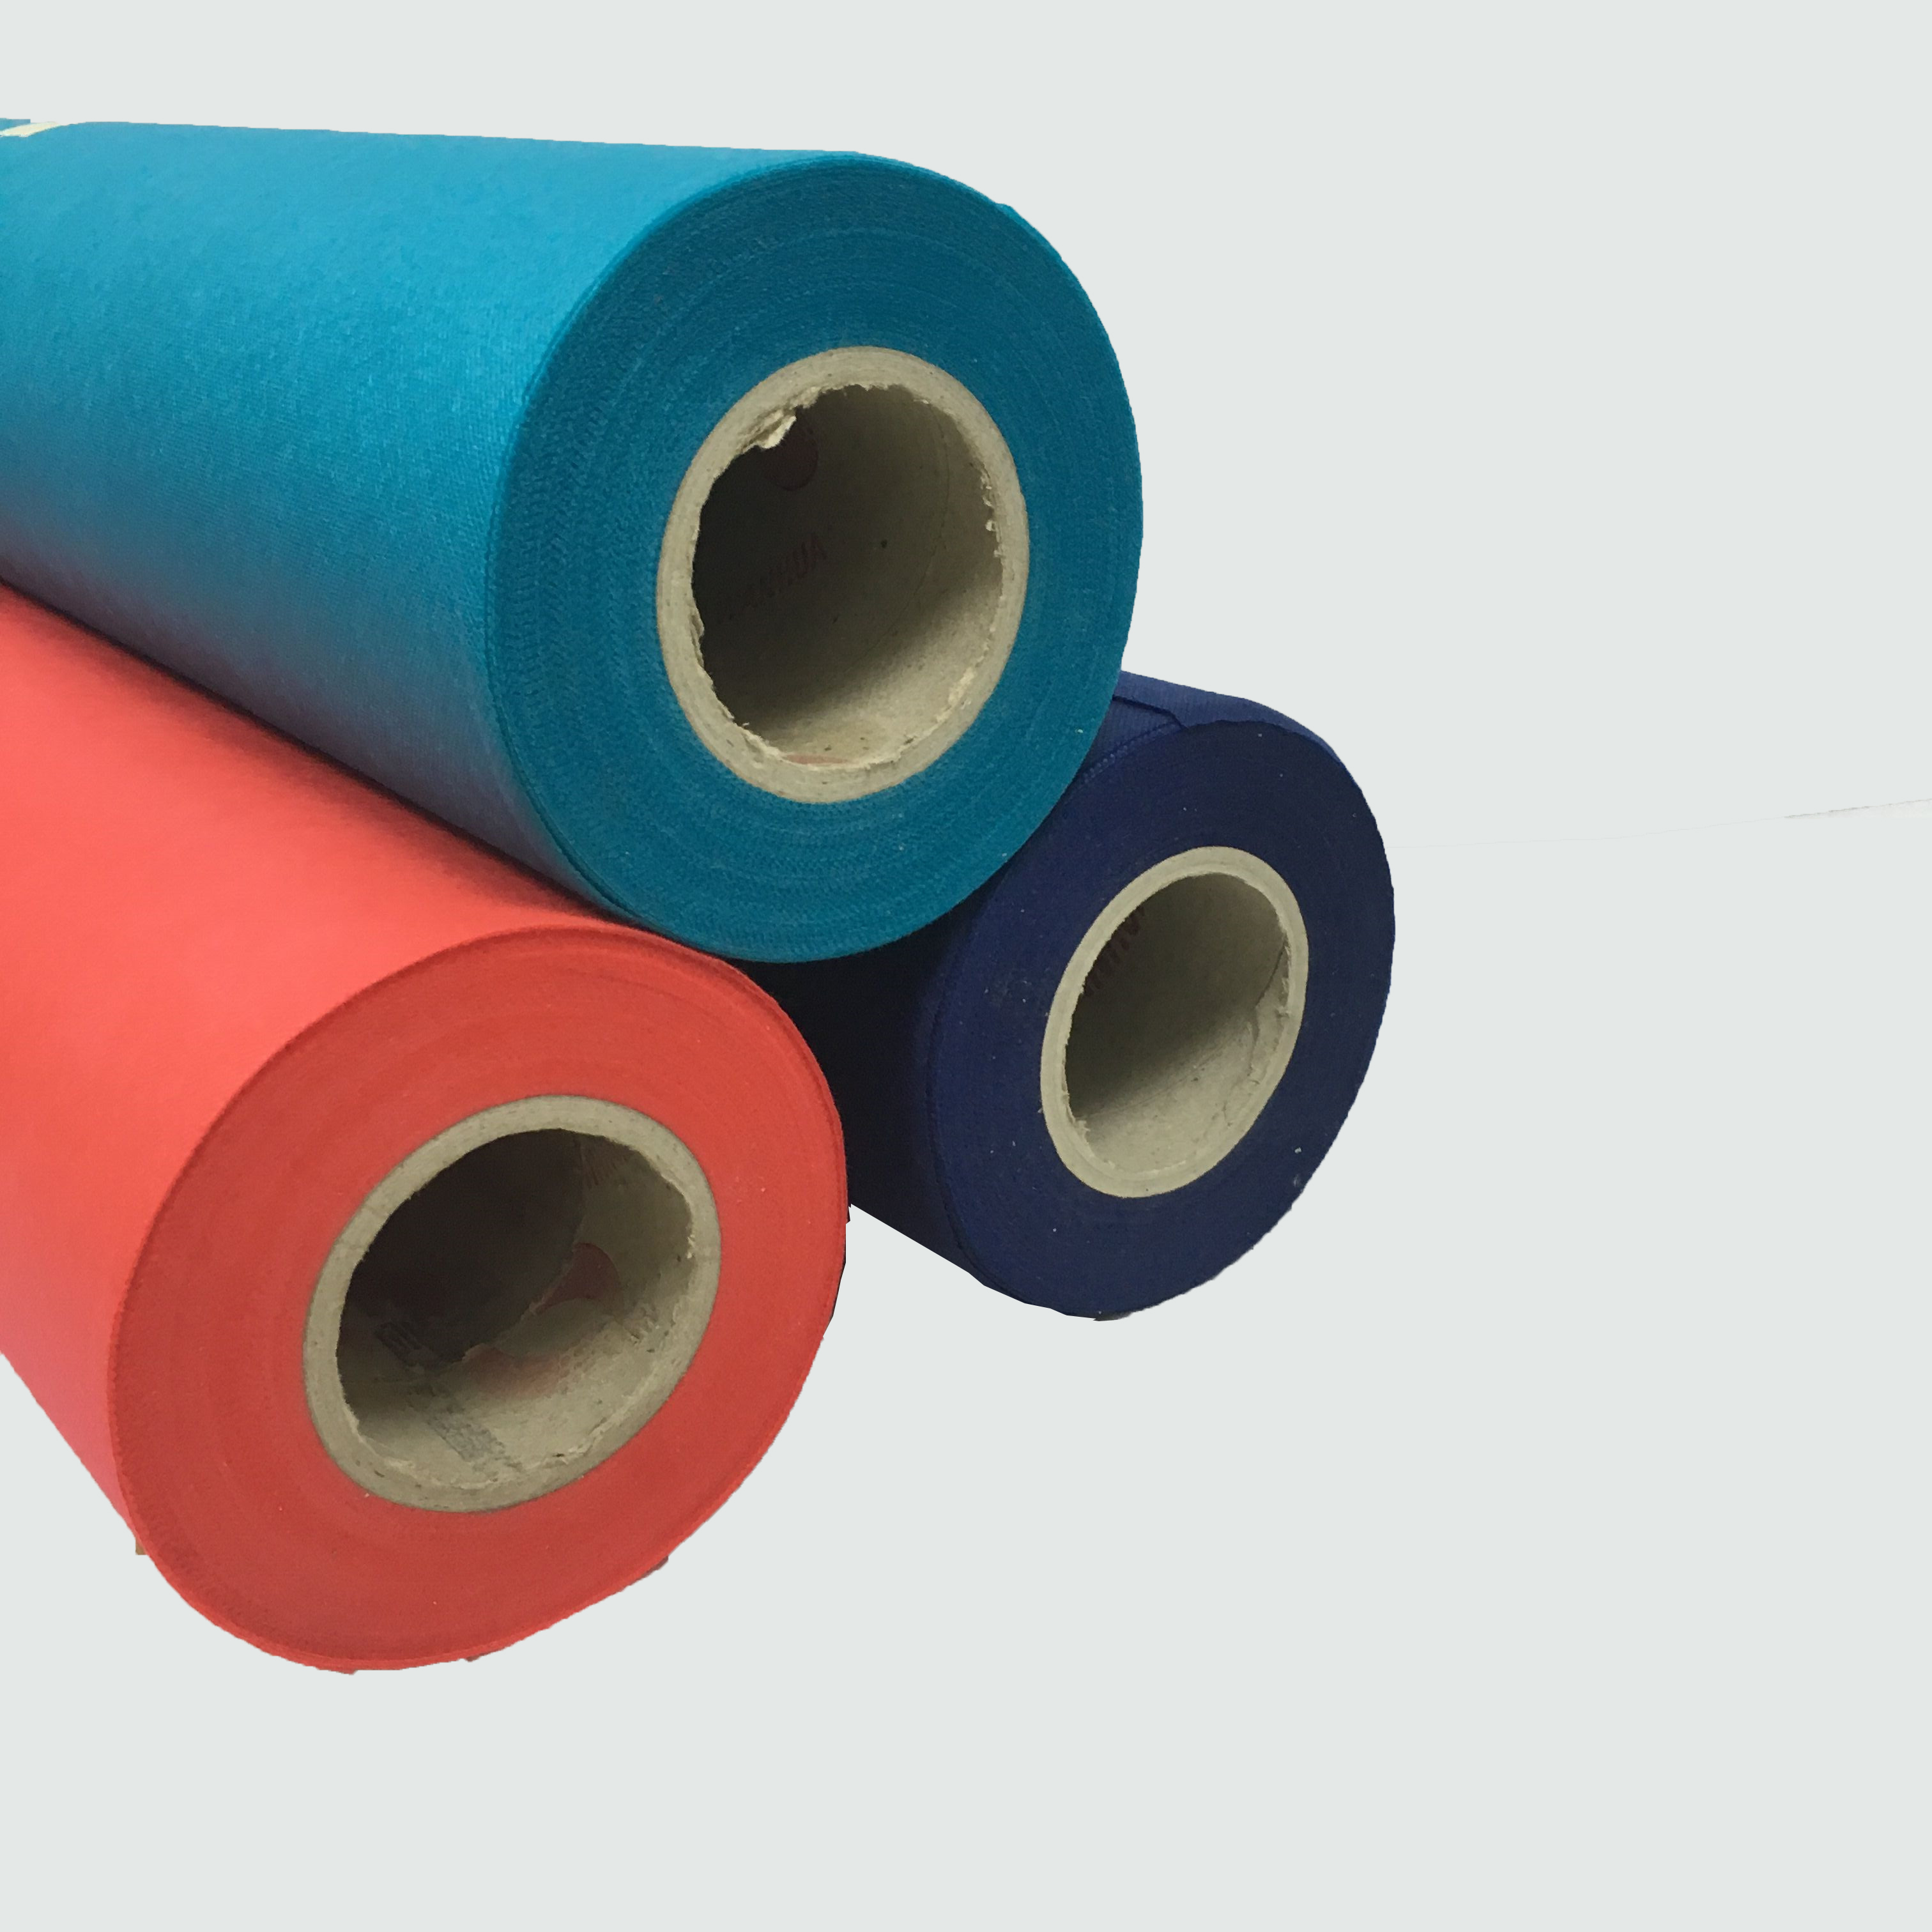 Hot Sell Small Spunbond Nonwoven Fabric Rolls 100% Pp Non Woven Fabric Table Roll Manufacture